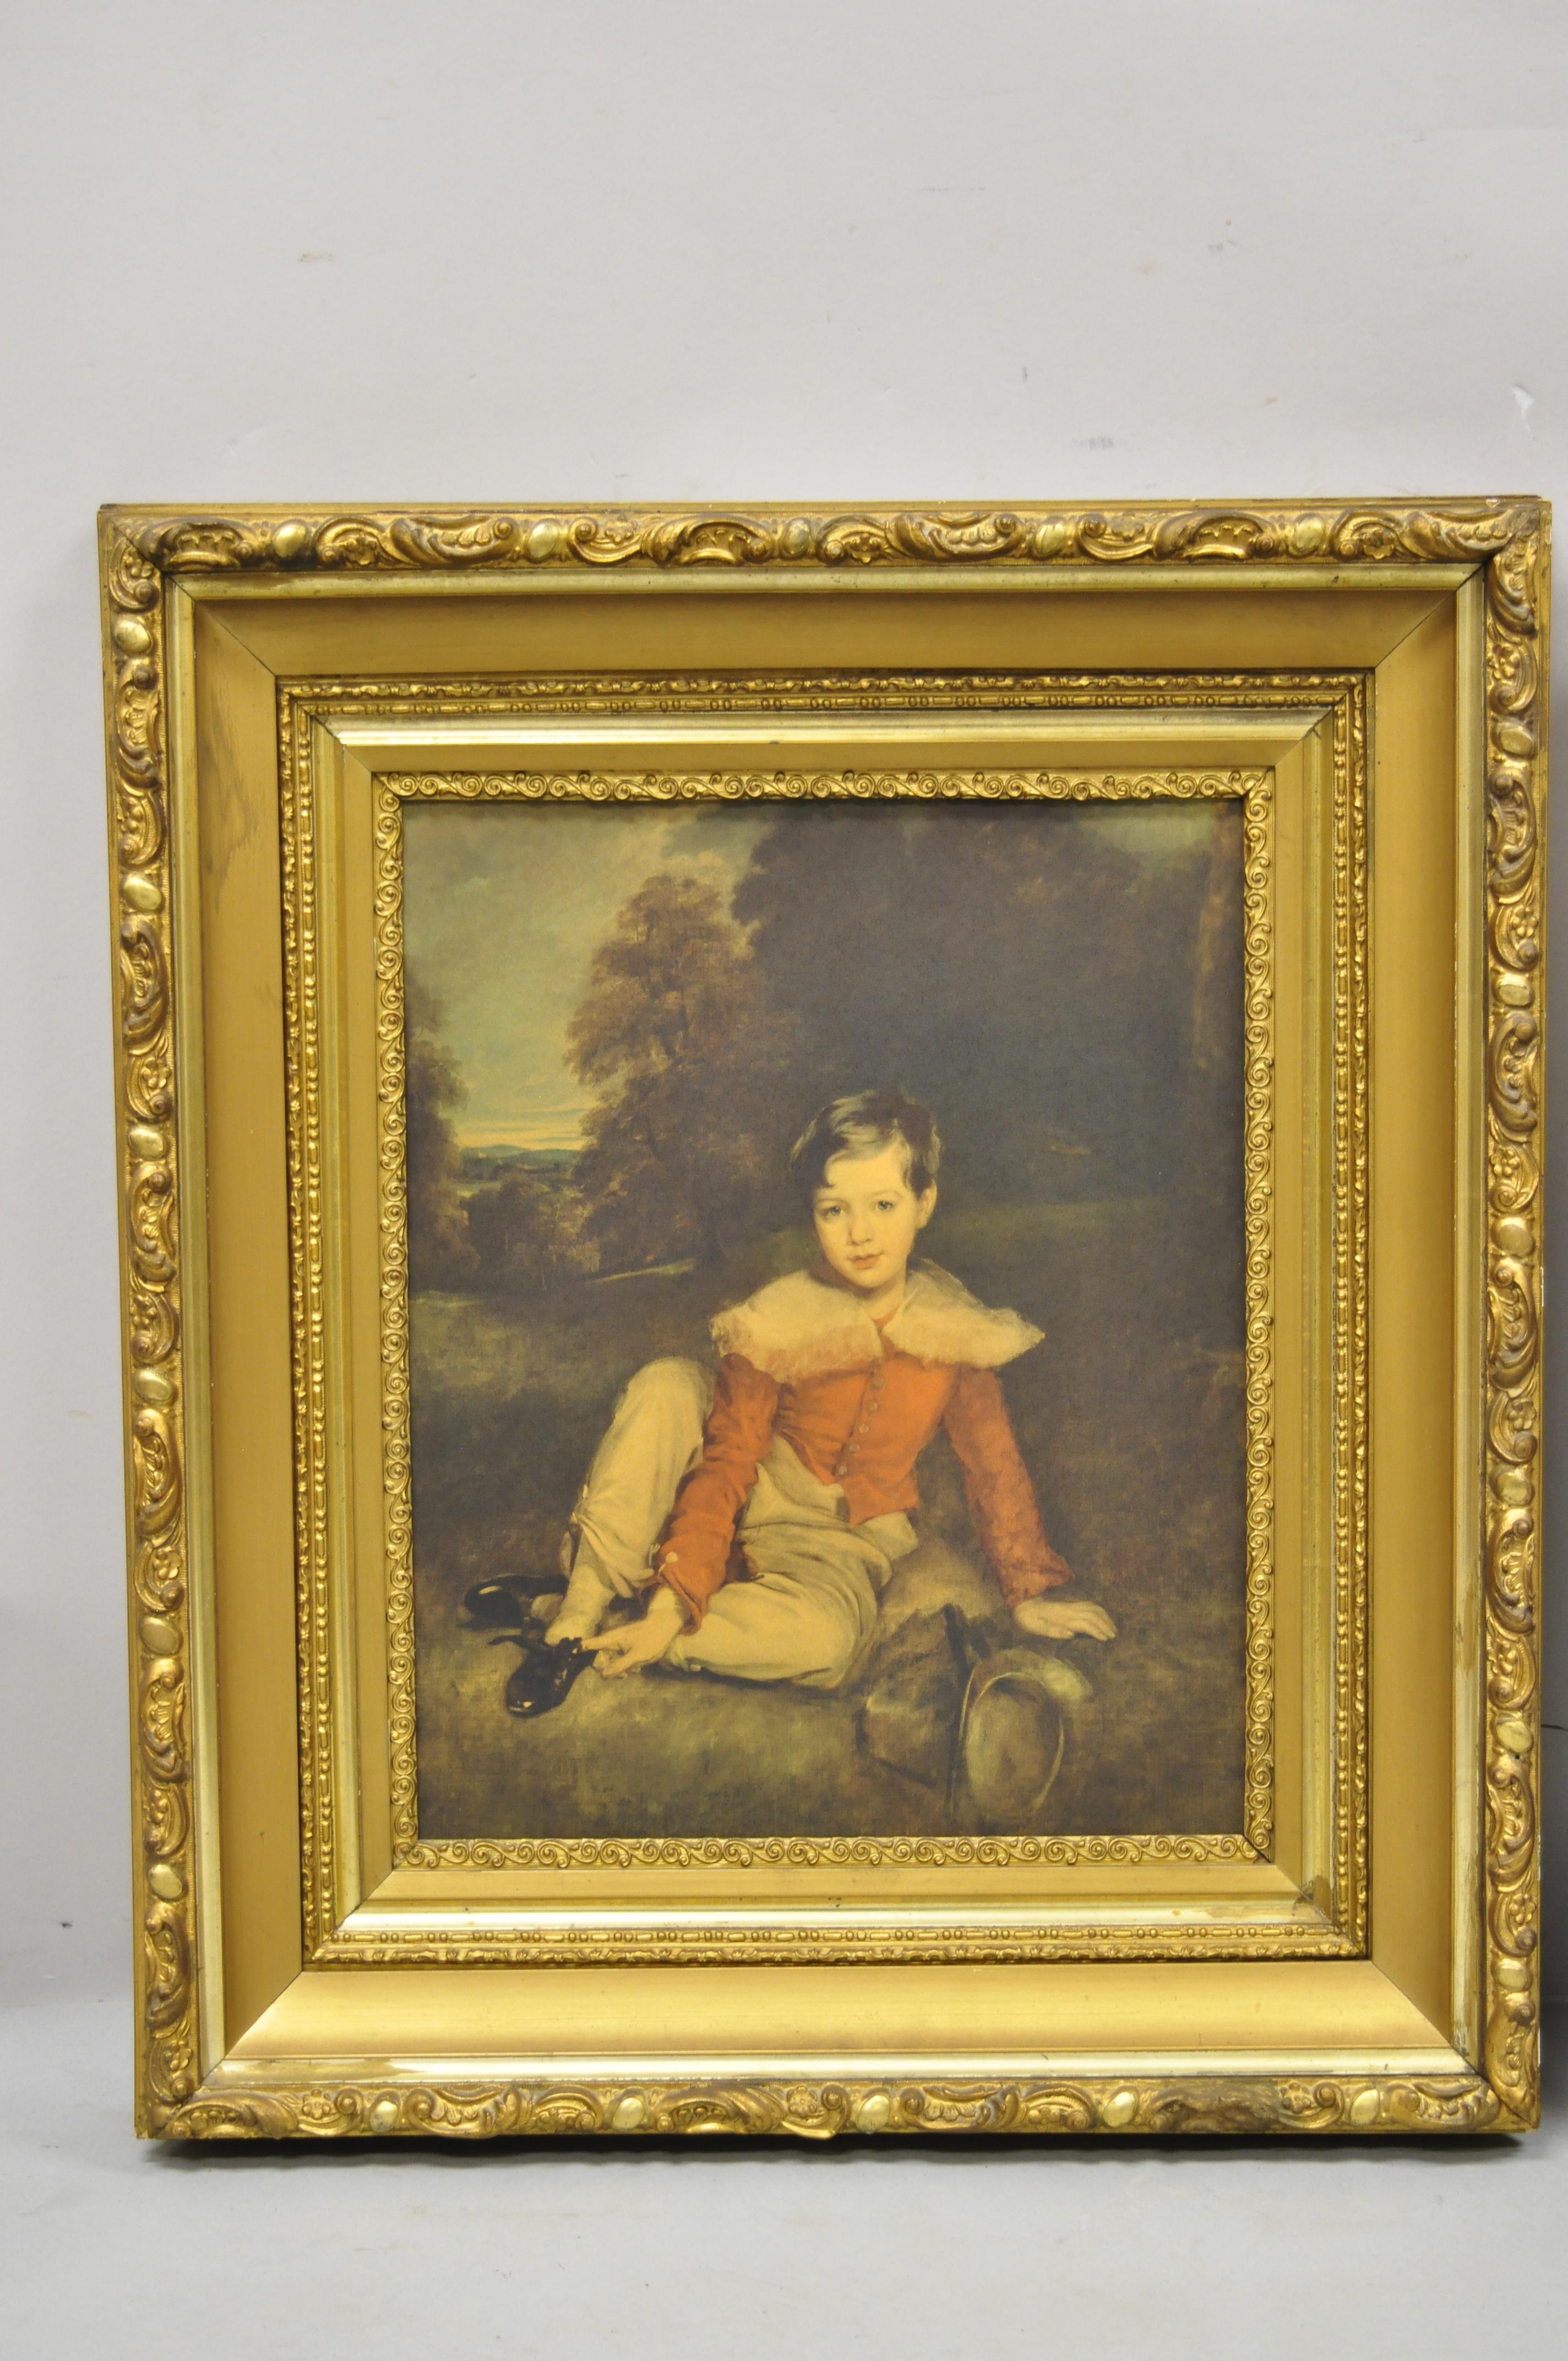 Vintage Hans Volkmann art print little princess girl lord Seaham boy gold gilt frame - a pair. Item features prints of young boy and young girl in what appears to be an English setting, very nice antique pair, great style and form. Very nice gold